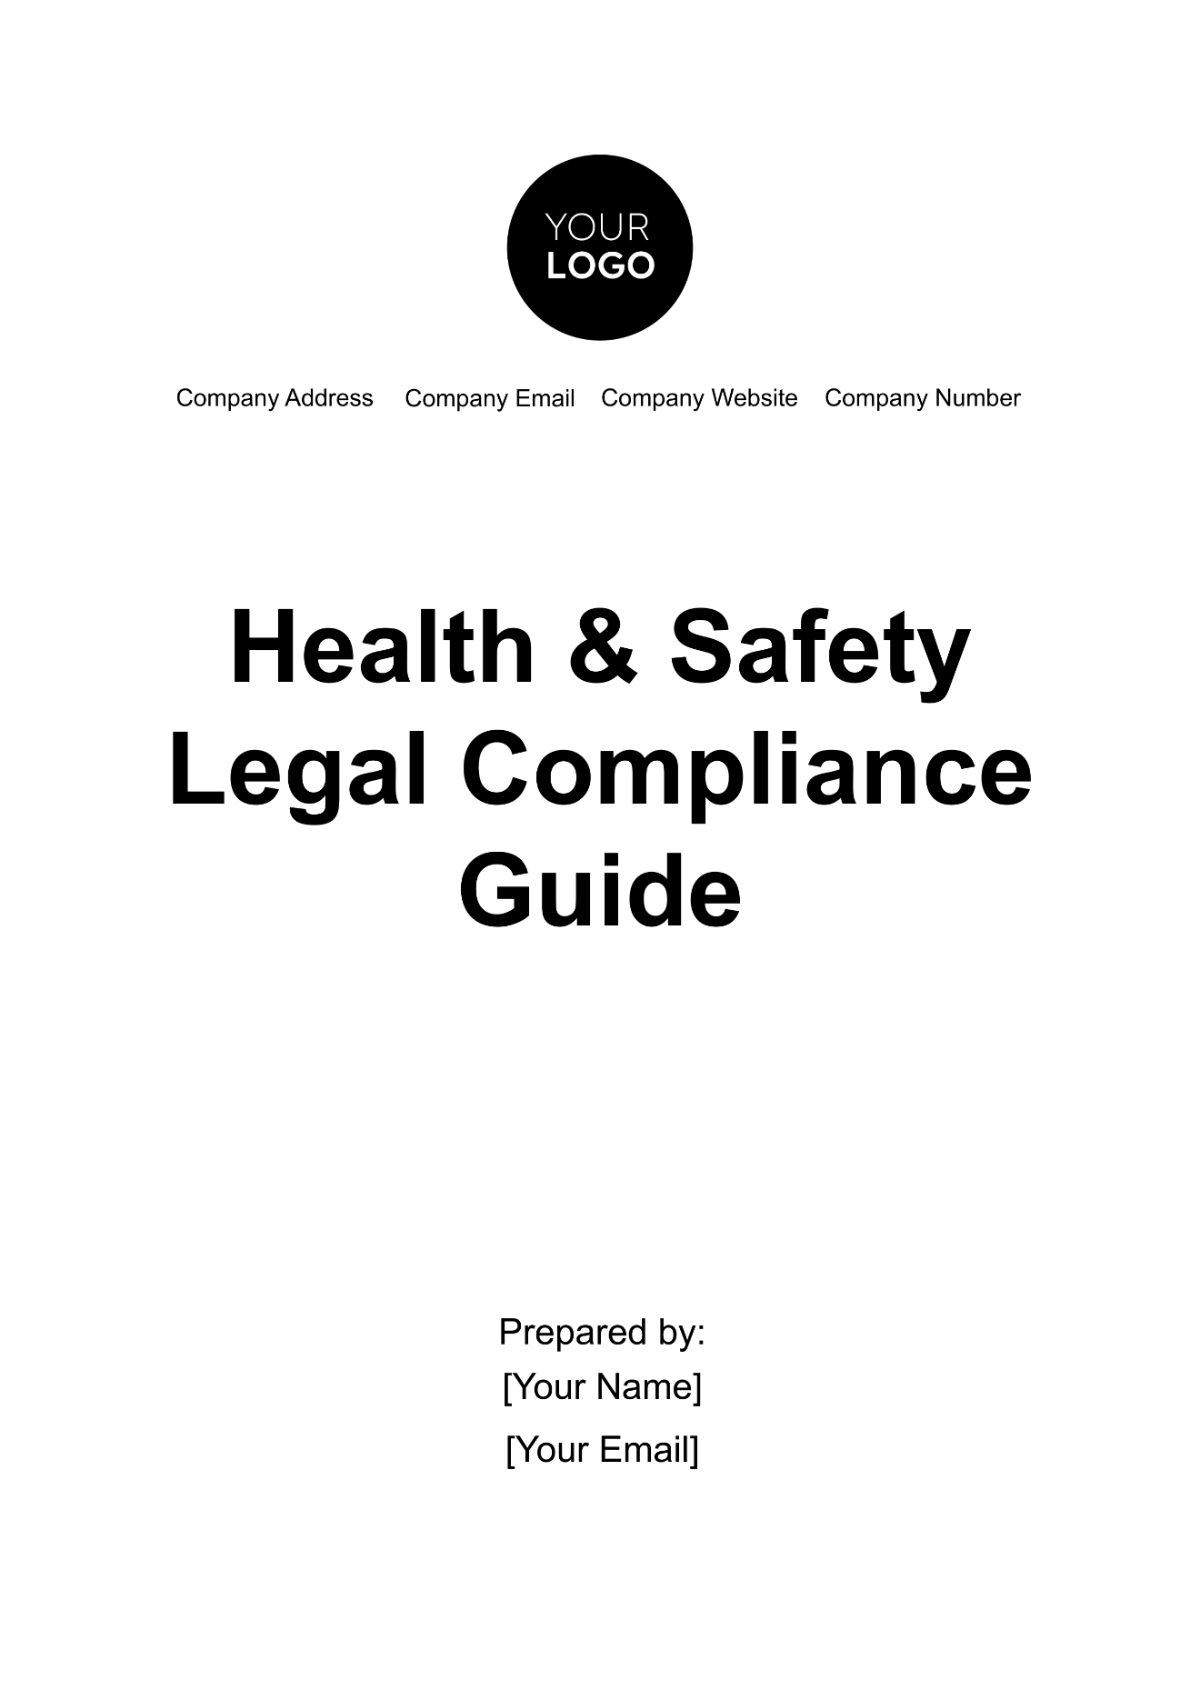 Health & Safety Legal Compliance Guide Template